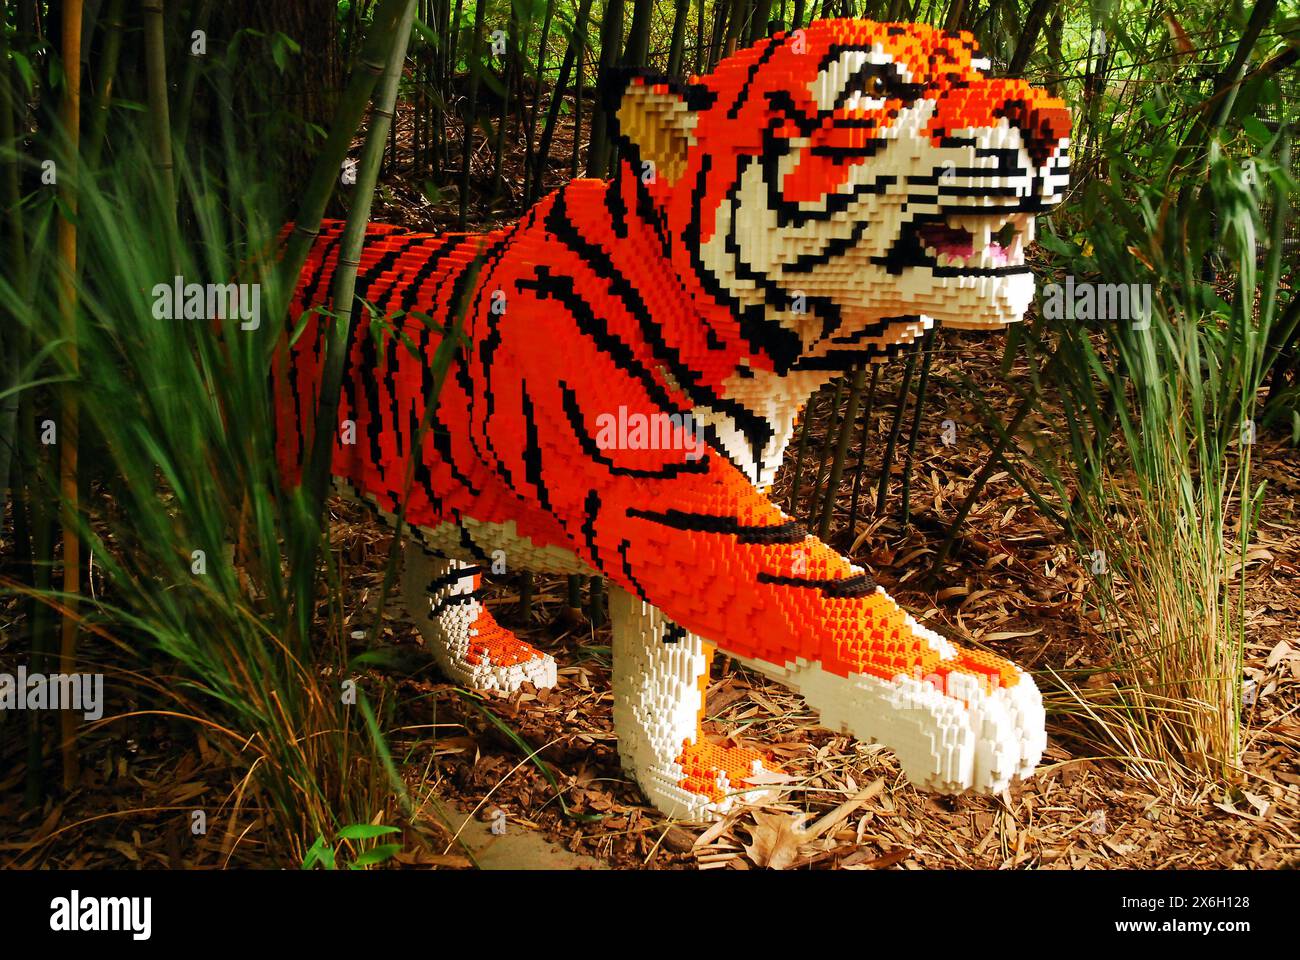 A striped tiger made of Legos appears to be emerging from the bushes at a display in the Bronx, New York Stock Photo